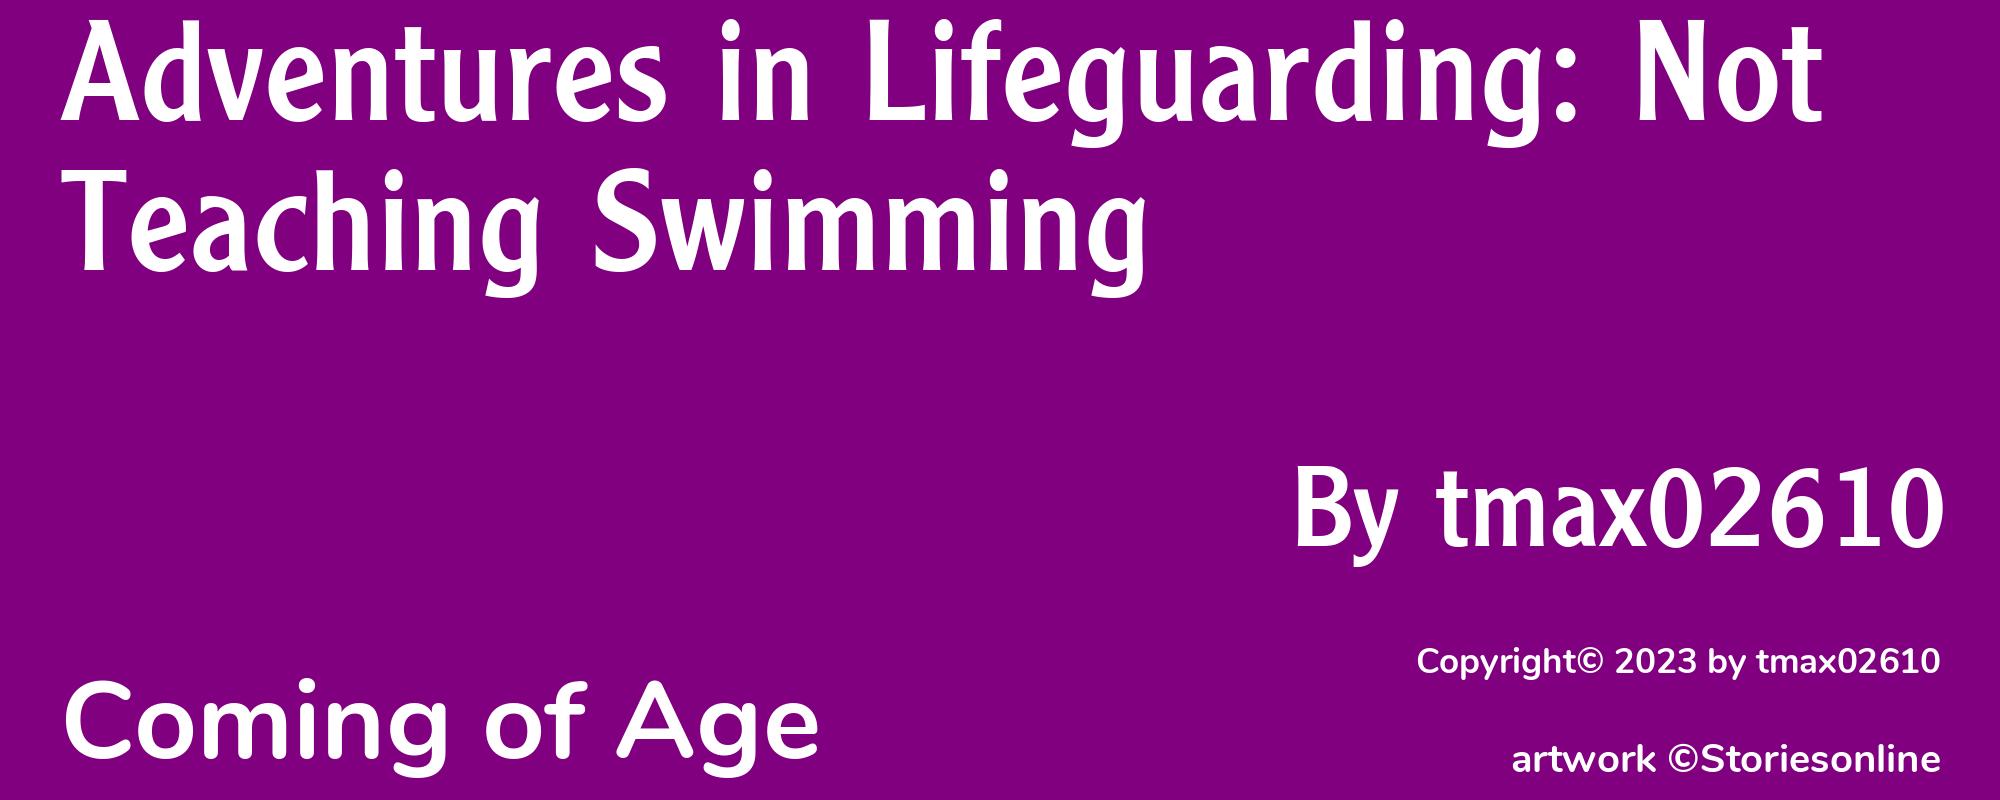 Adventures in Lifeguarding: Not Teaching Swimming - Cover